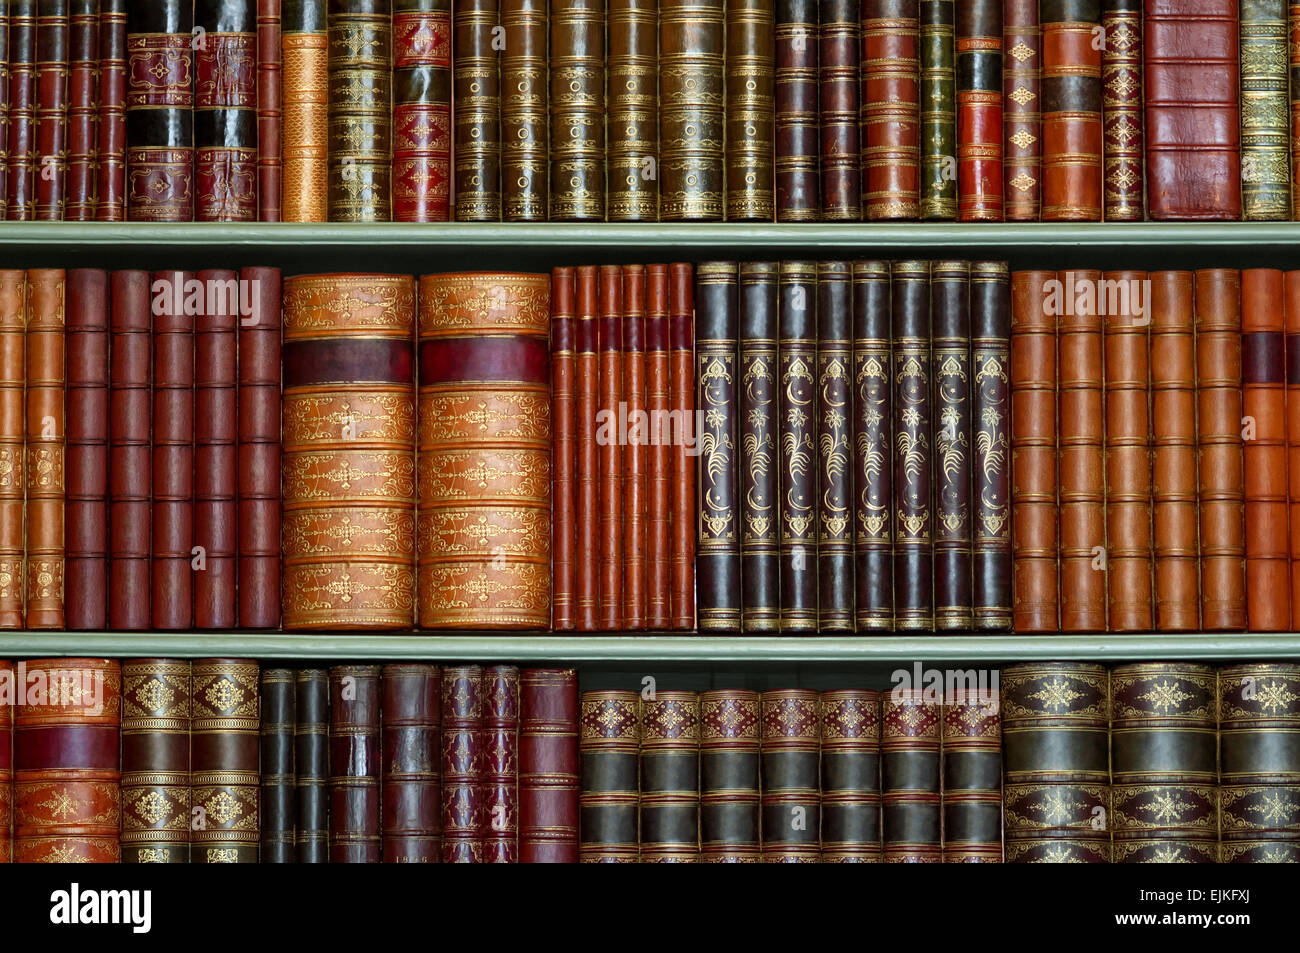 Old library of vintage hard cover books on shelves Stock Photo